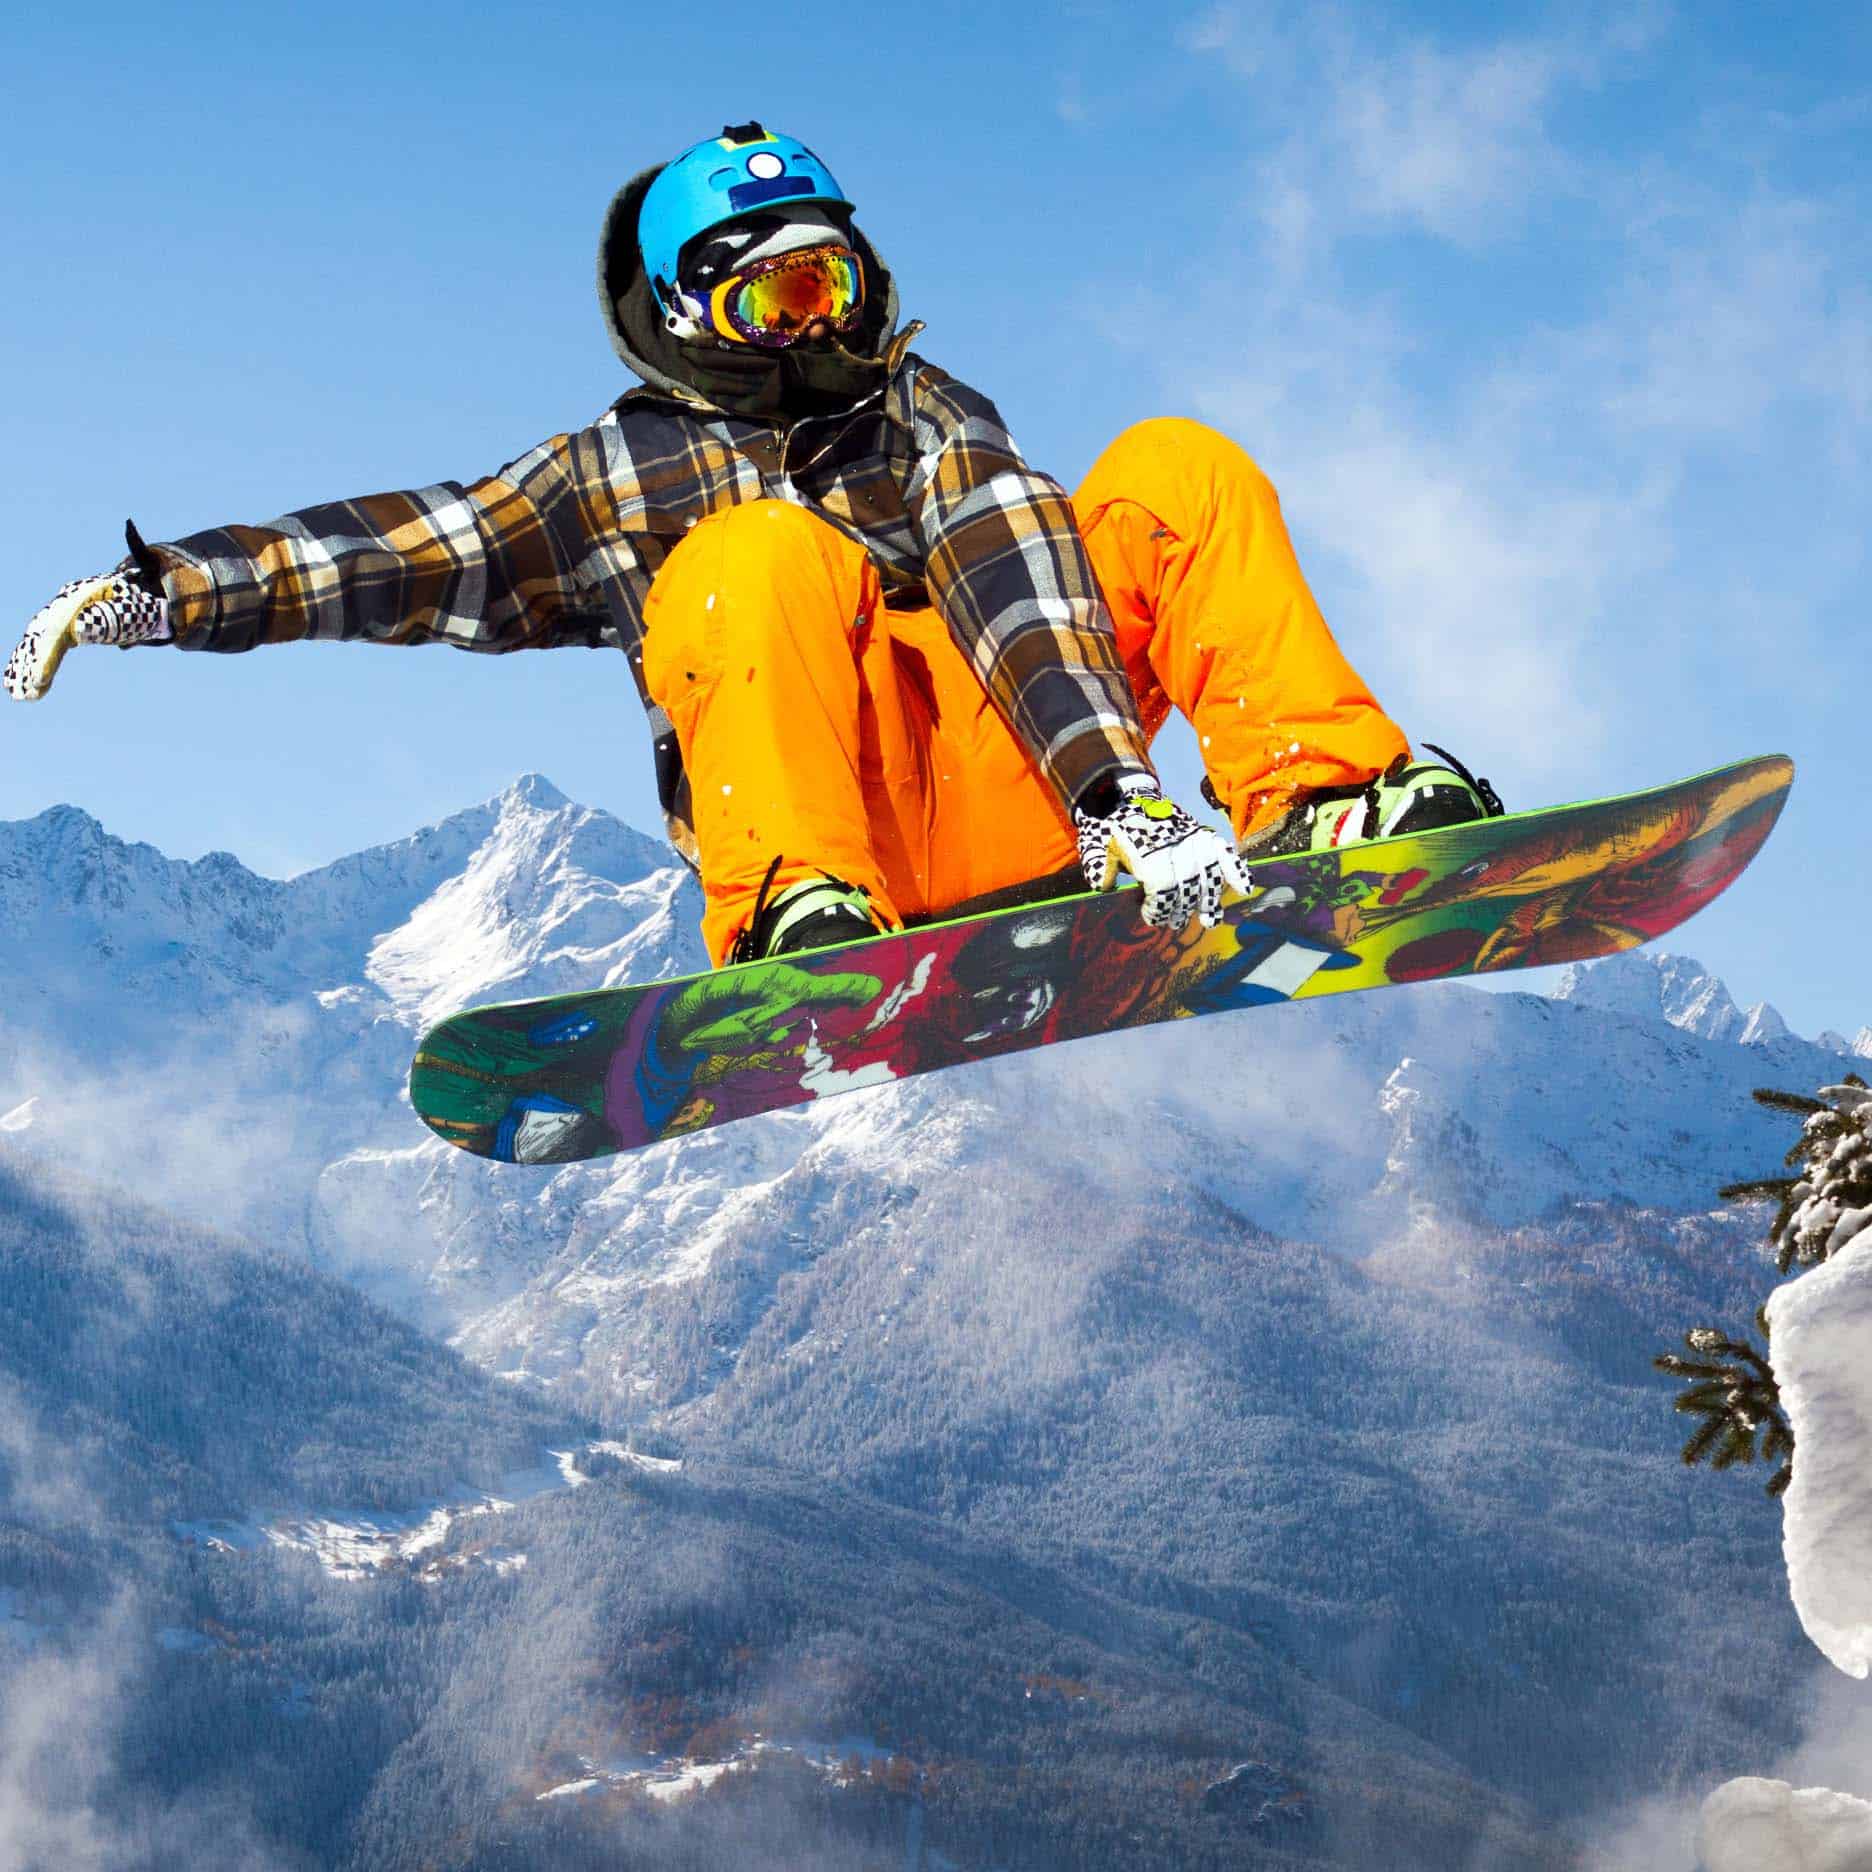 Snowboarder airbore with mountain in background